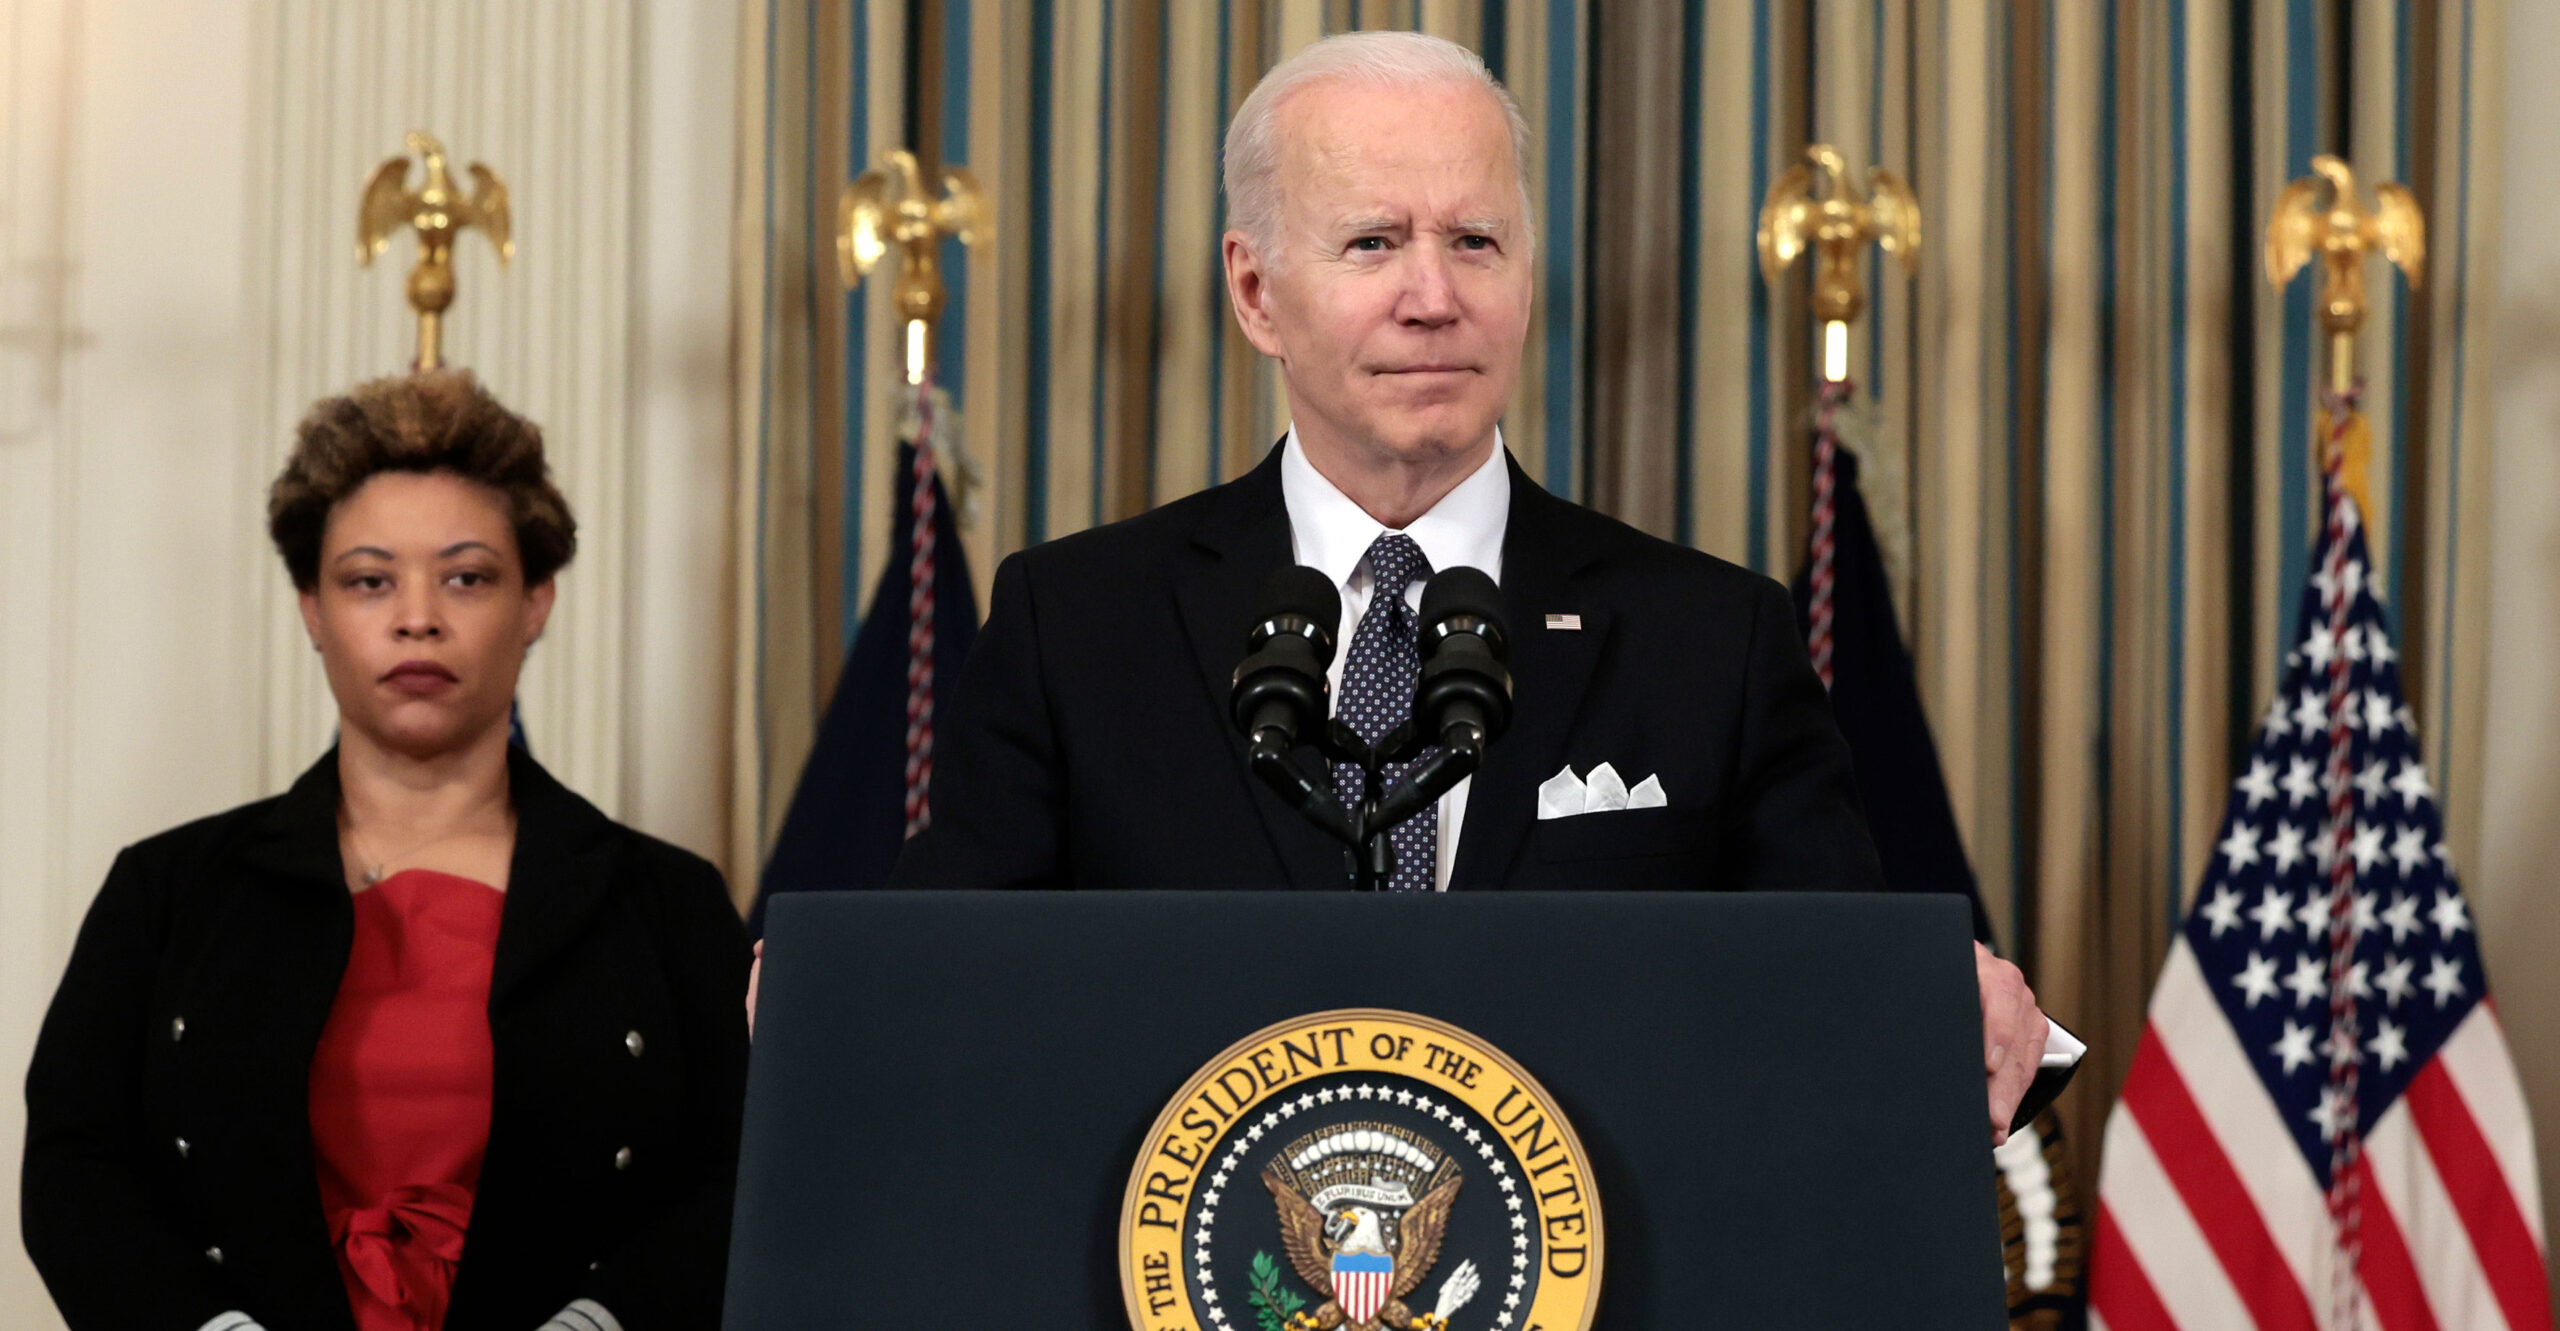 5 Big Problems With Biden's Big-Government Budget